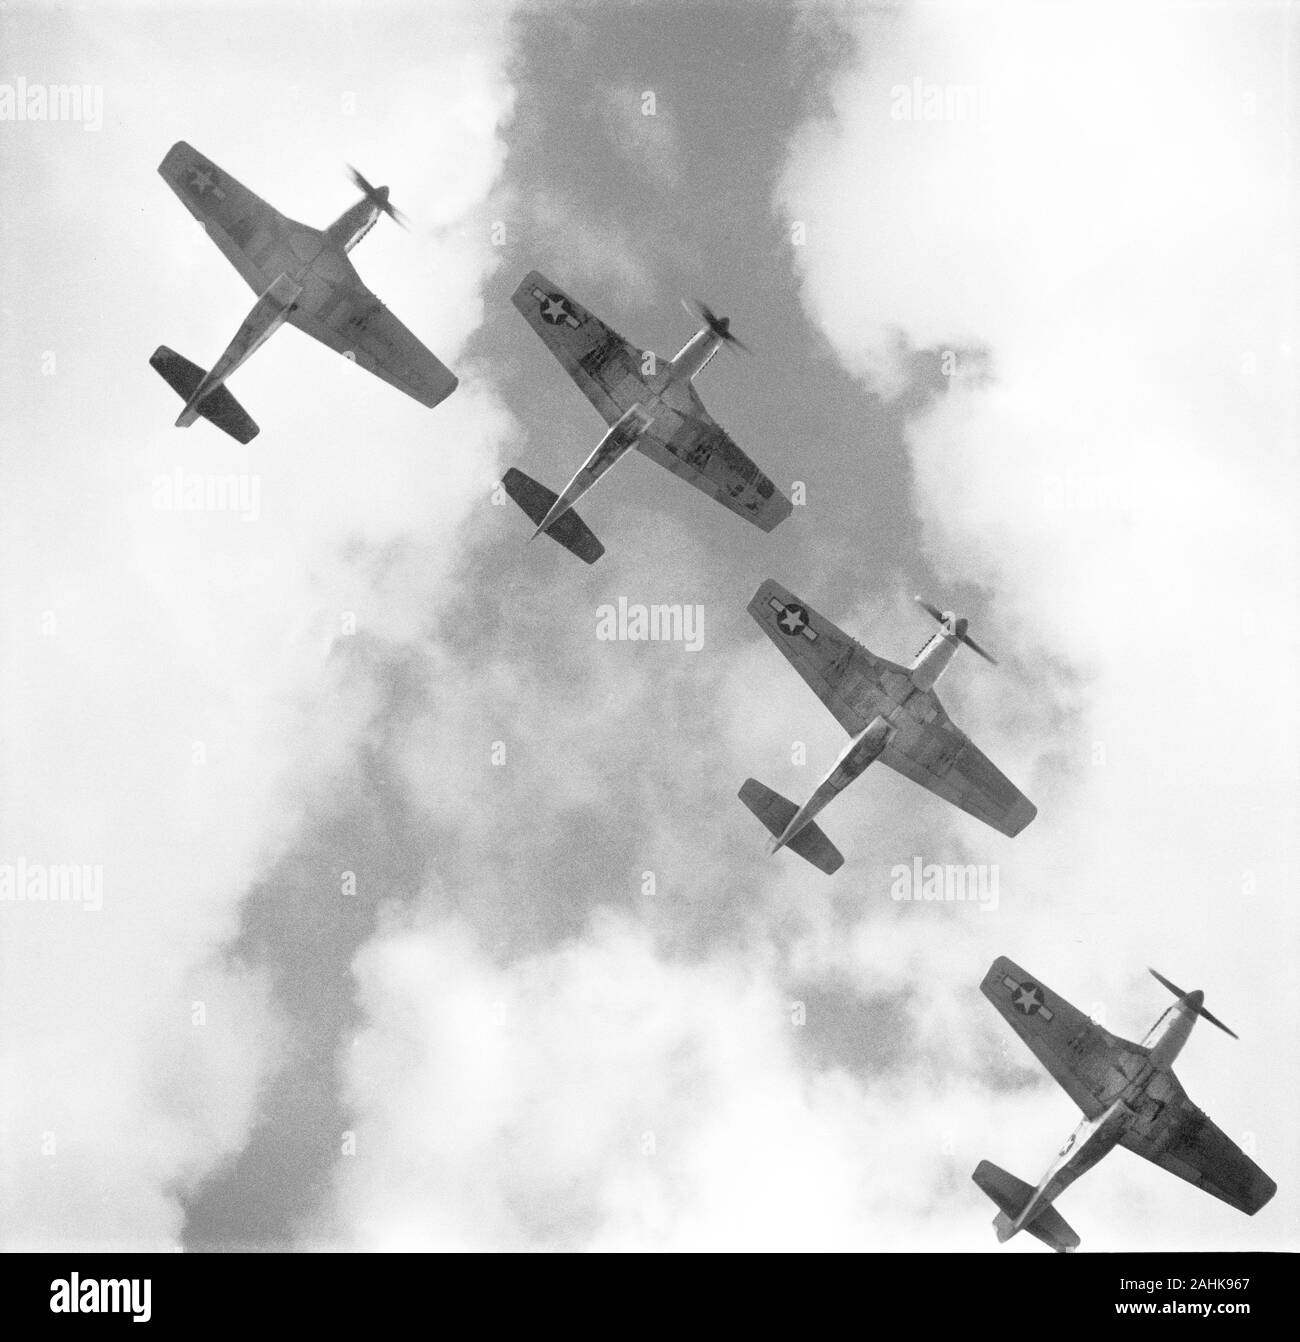 Low Angle View of 4 P-51 Mustang Avions volant en formation, Ramitelli, Italie, photo de Toni Frissell, Mars 1945 Banque D'Images